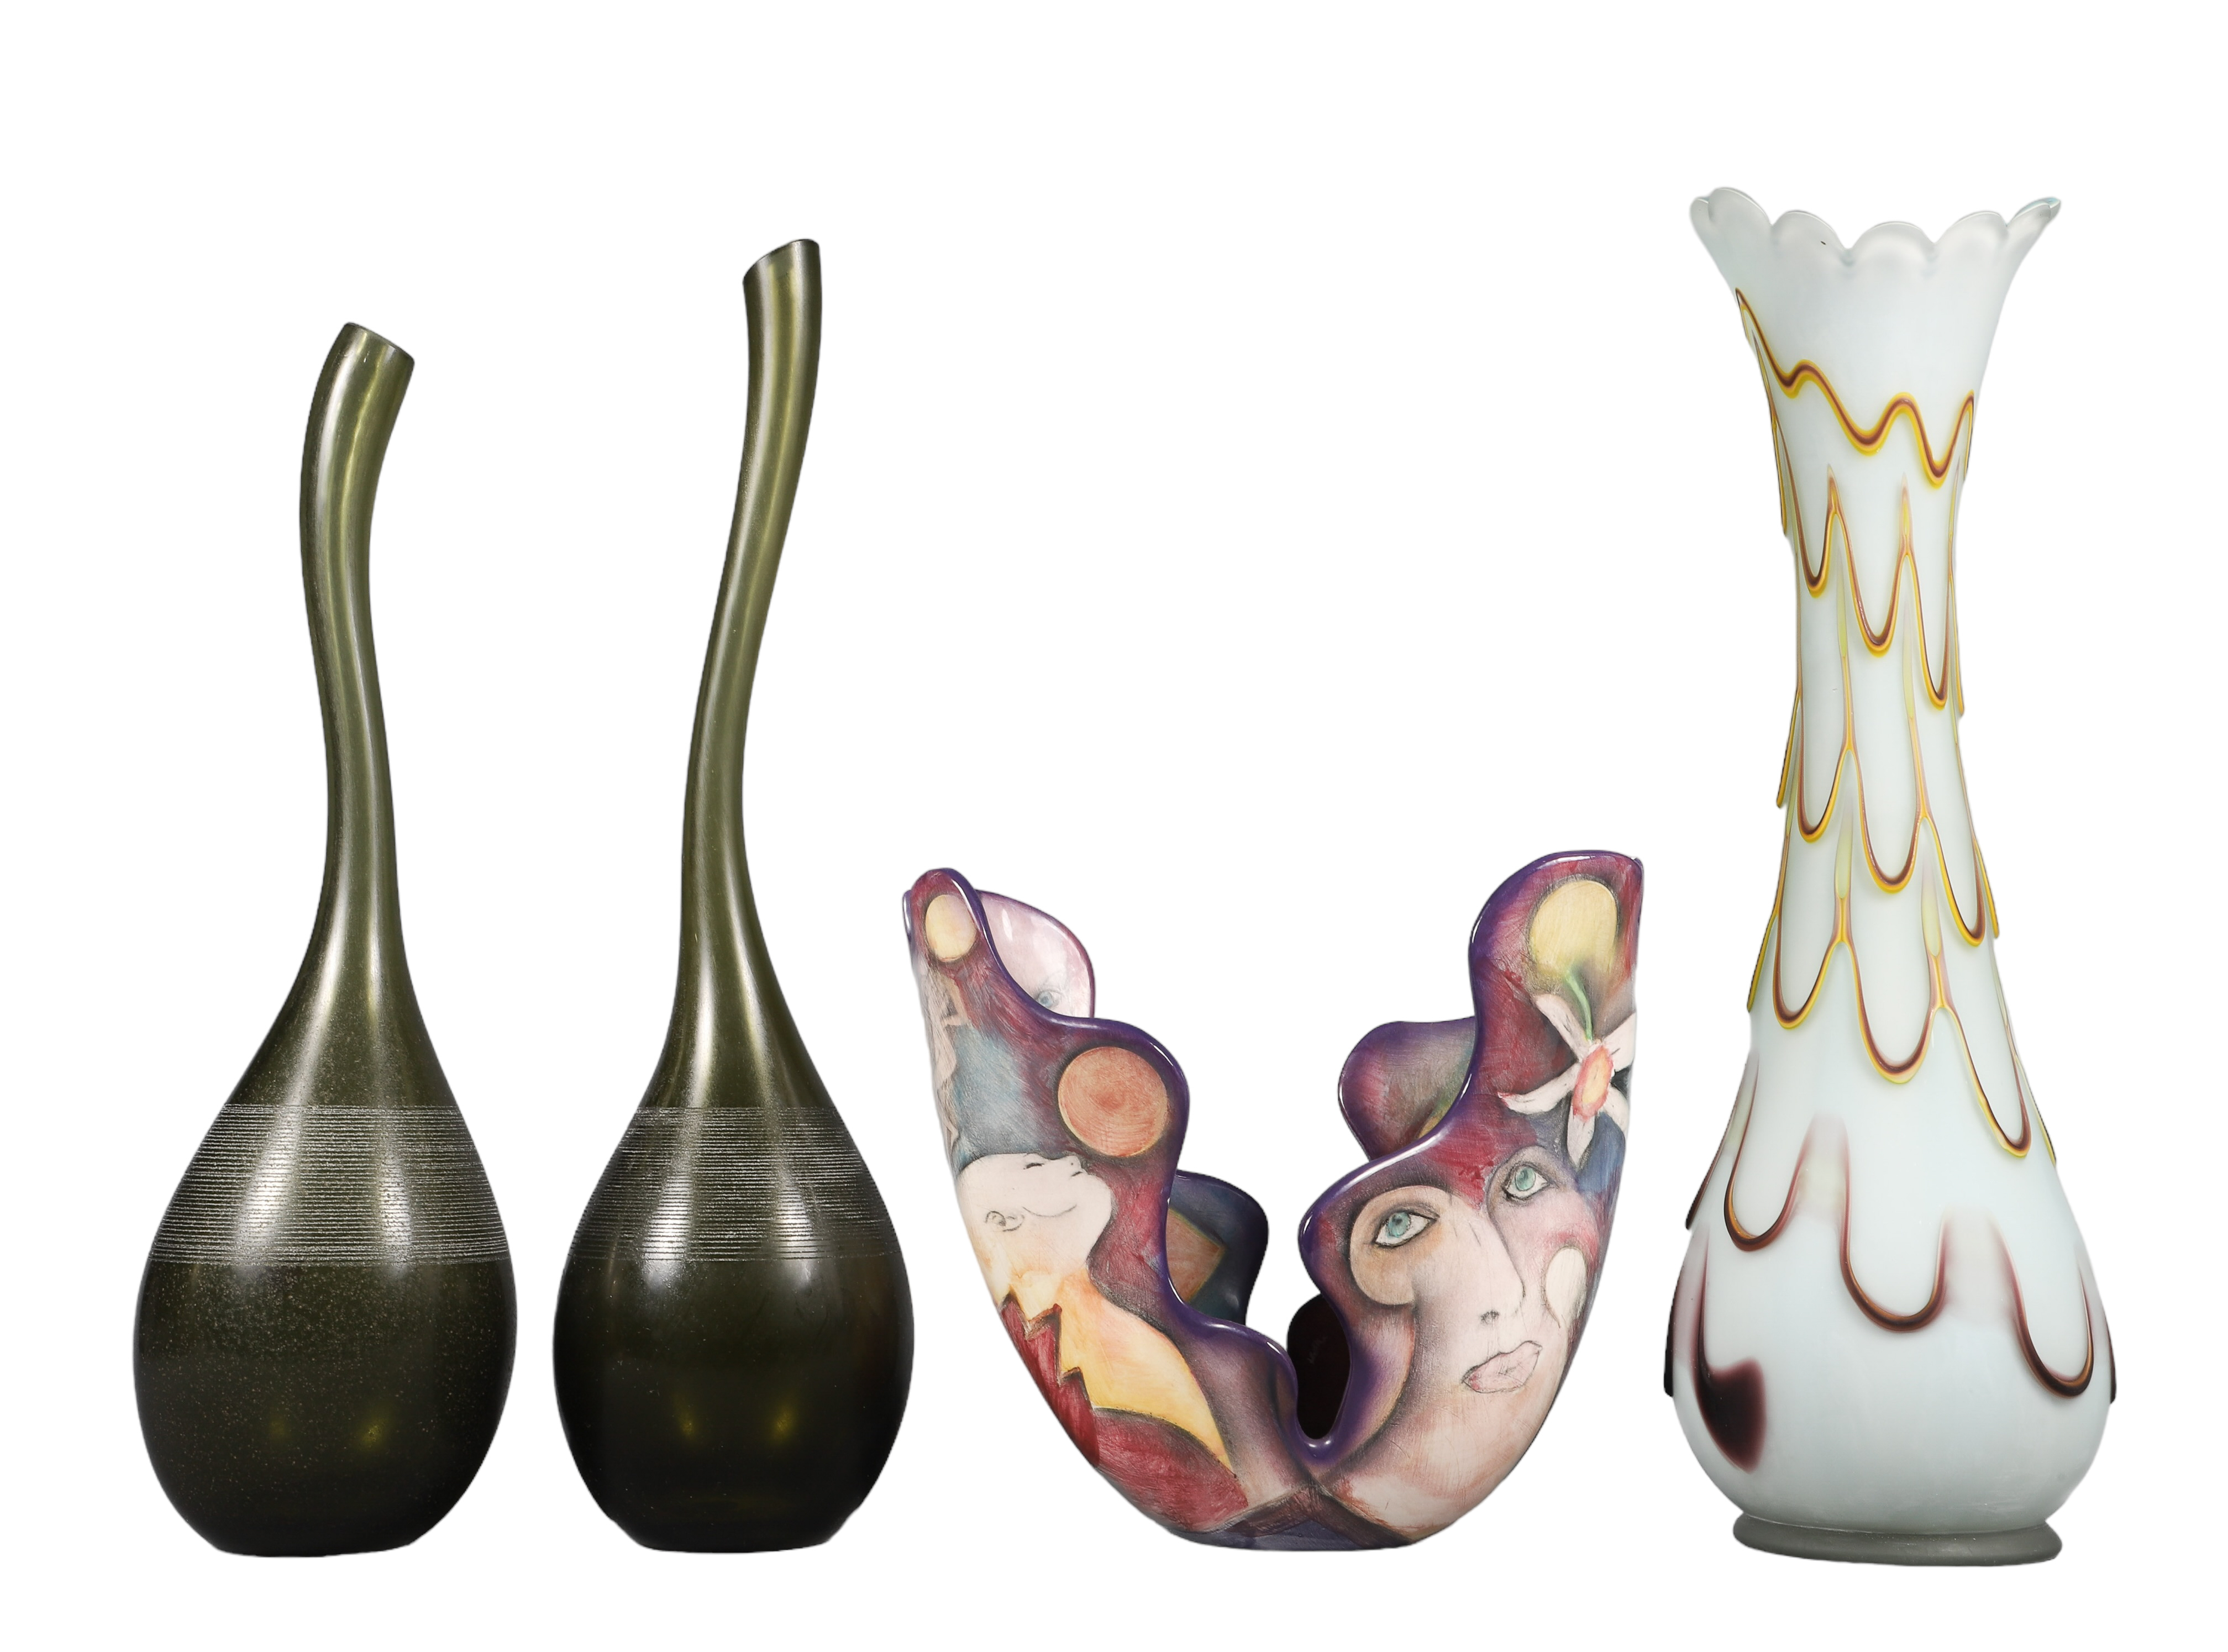 Art Glass and porcelain vases to